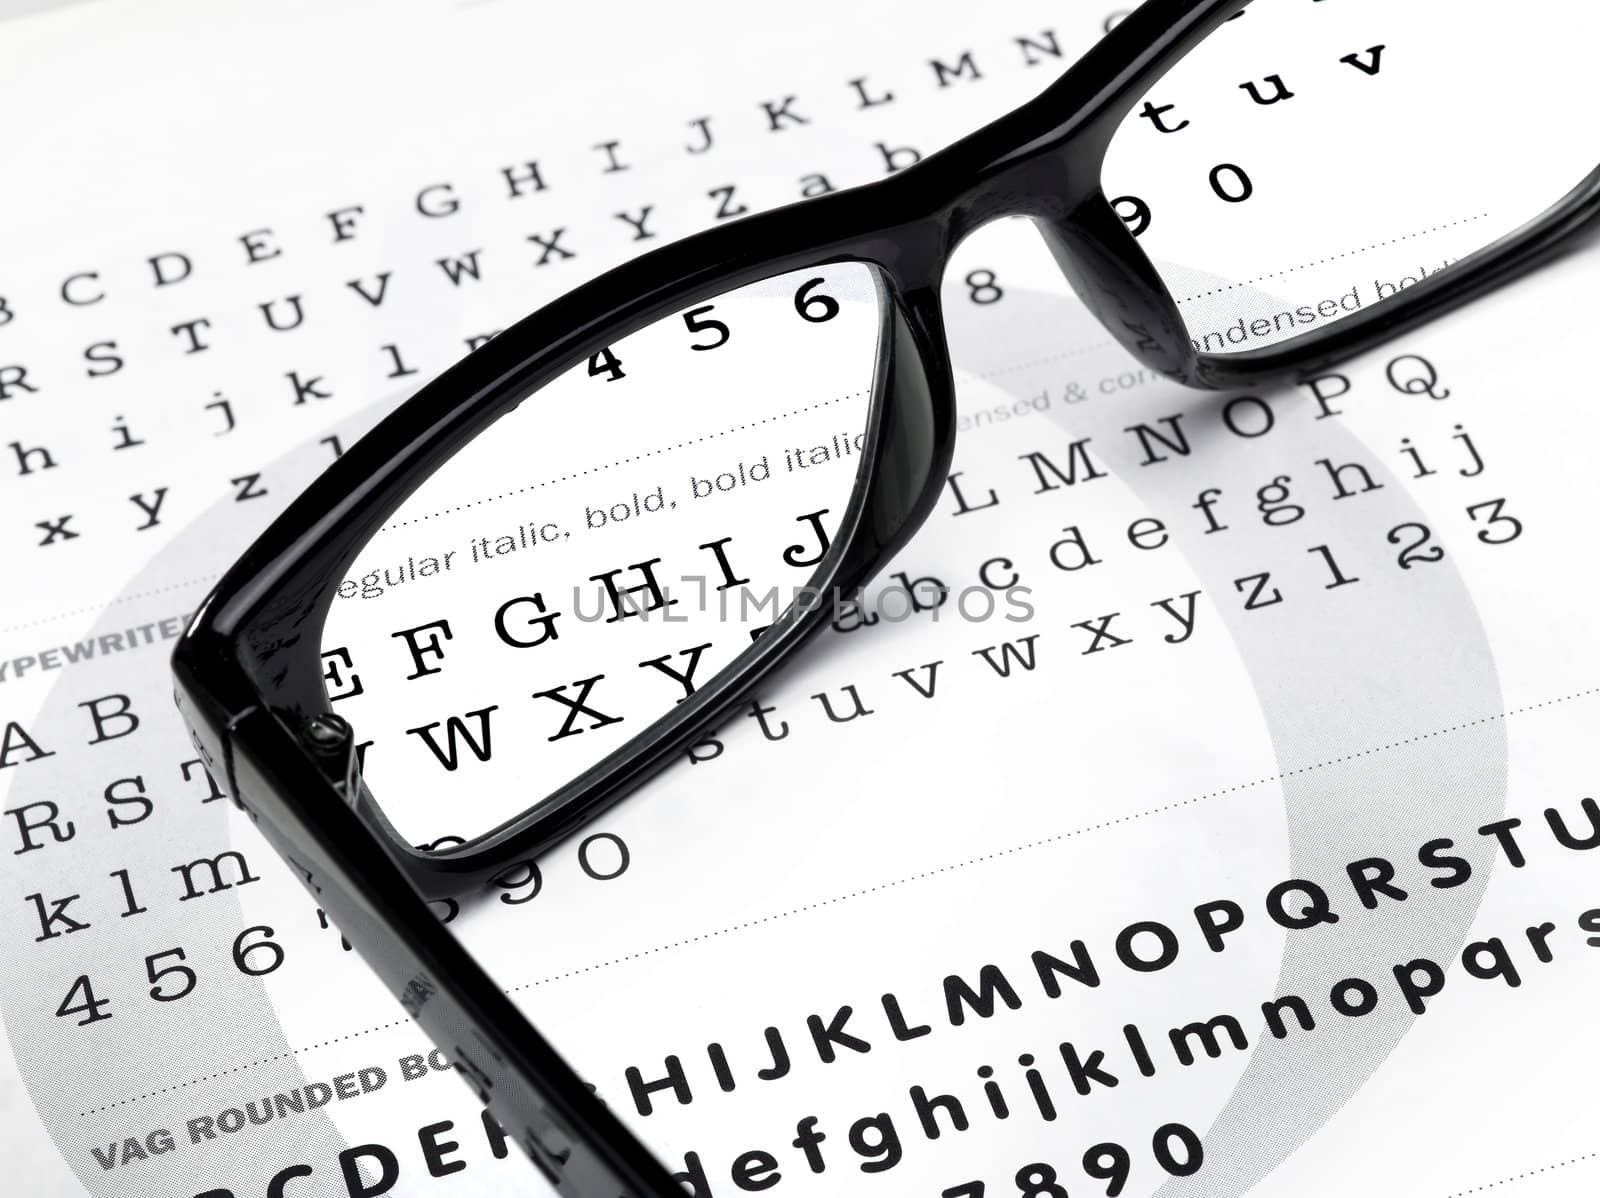 magnifying glasses on a writing background